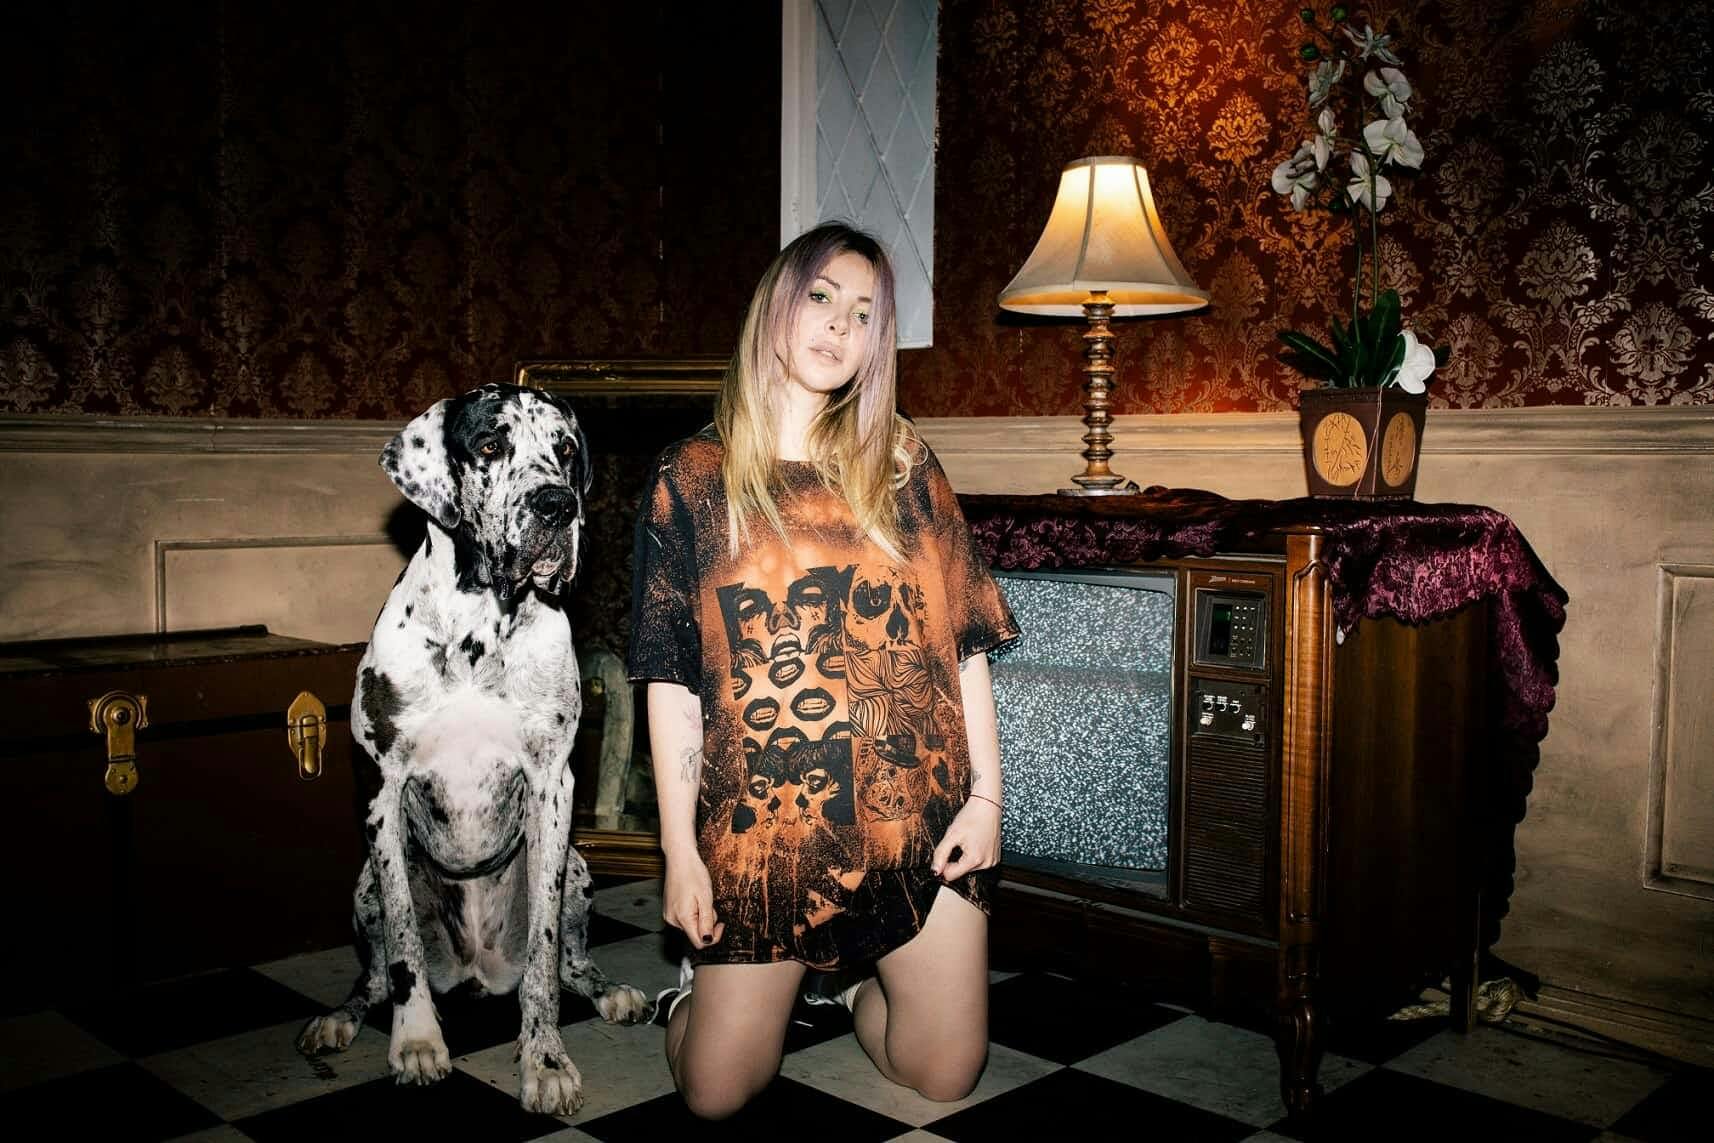 ALISON WONDERLAND CONJURES STRENGTH FROM SOLITUDE IN DOWN THE LINE